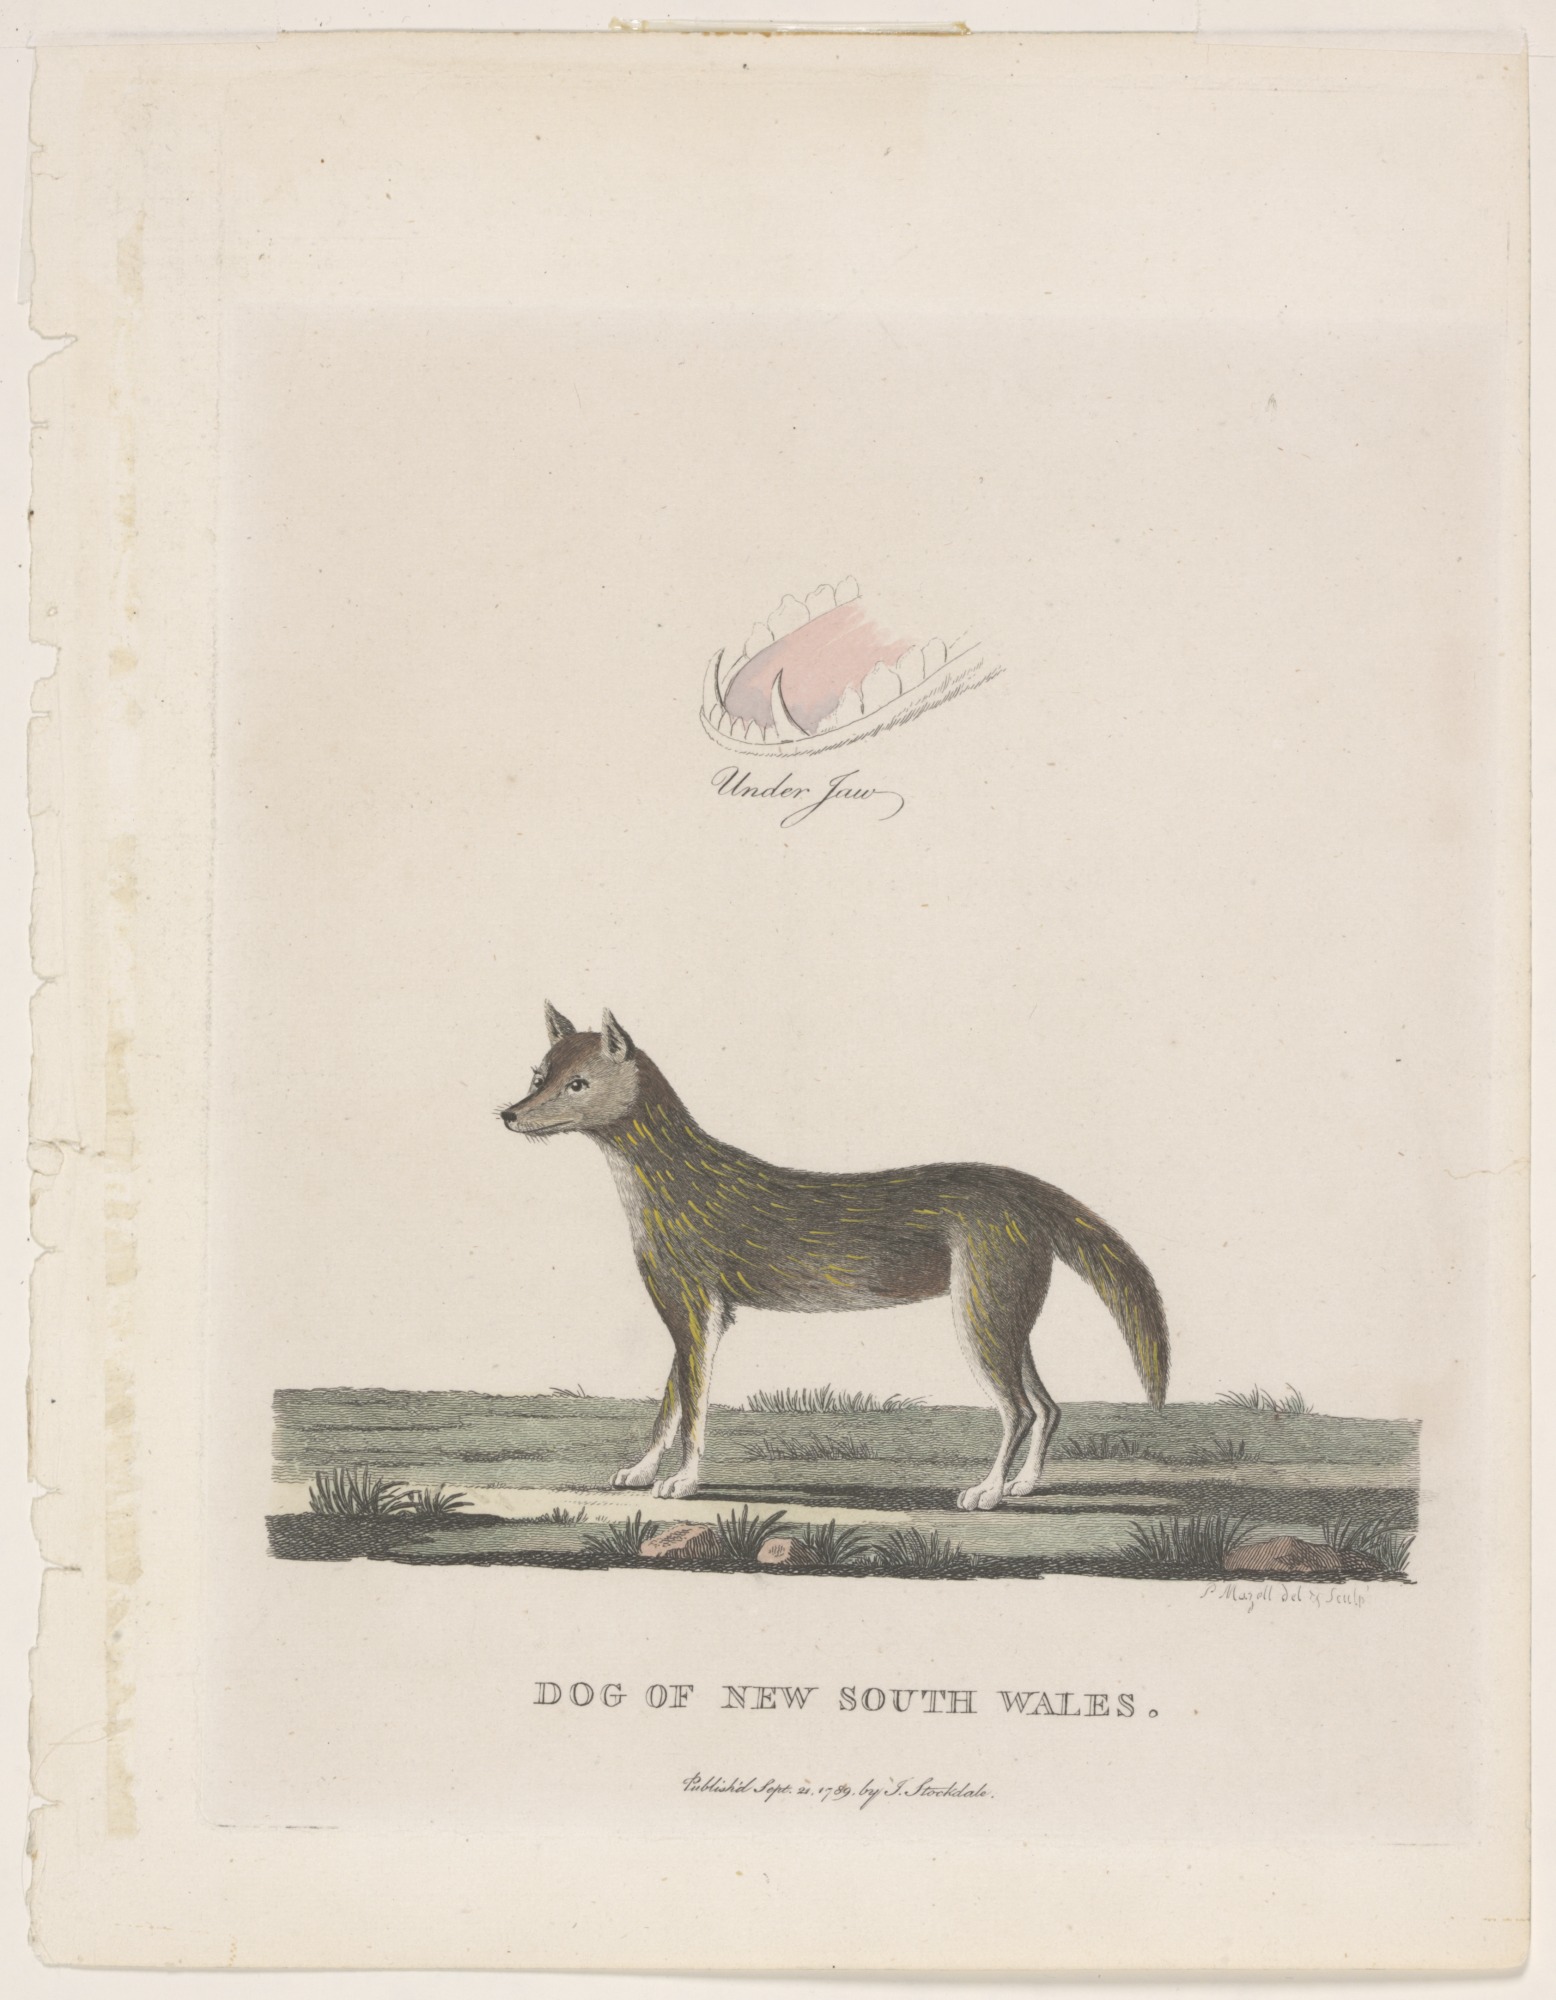 The first published depiction of a dingo. ‘Dog of New South Wales’ by Peter Mazell (artist and engraver), 1789